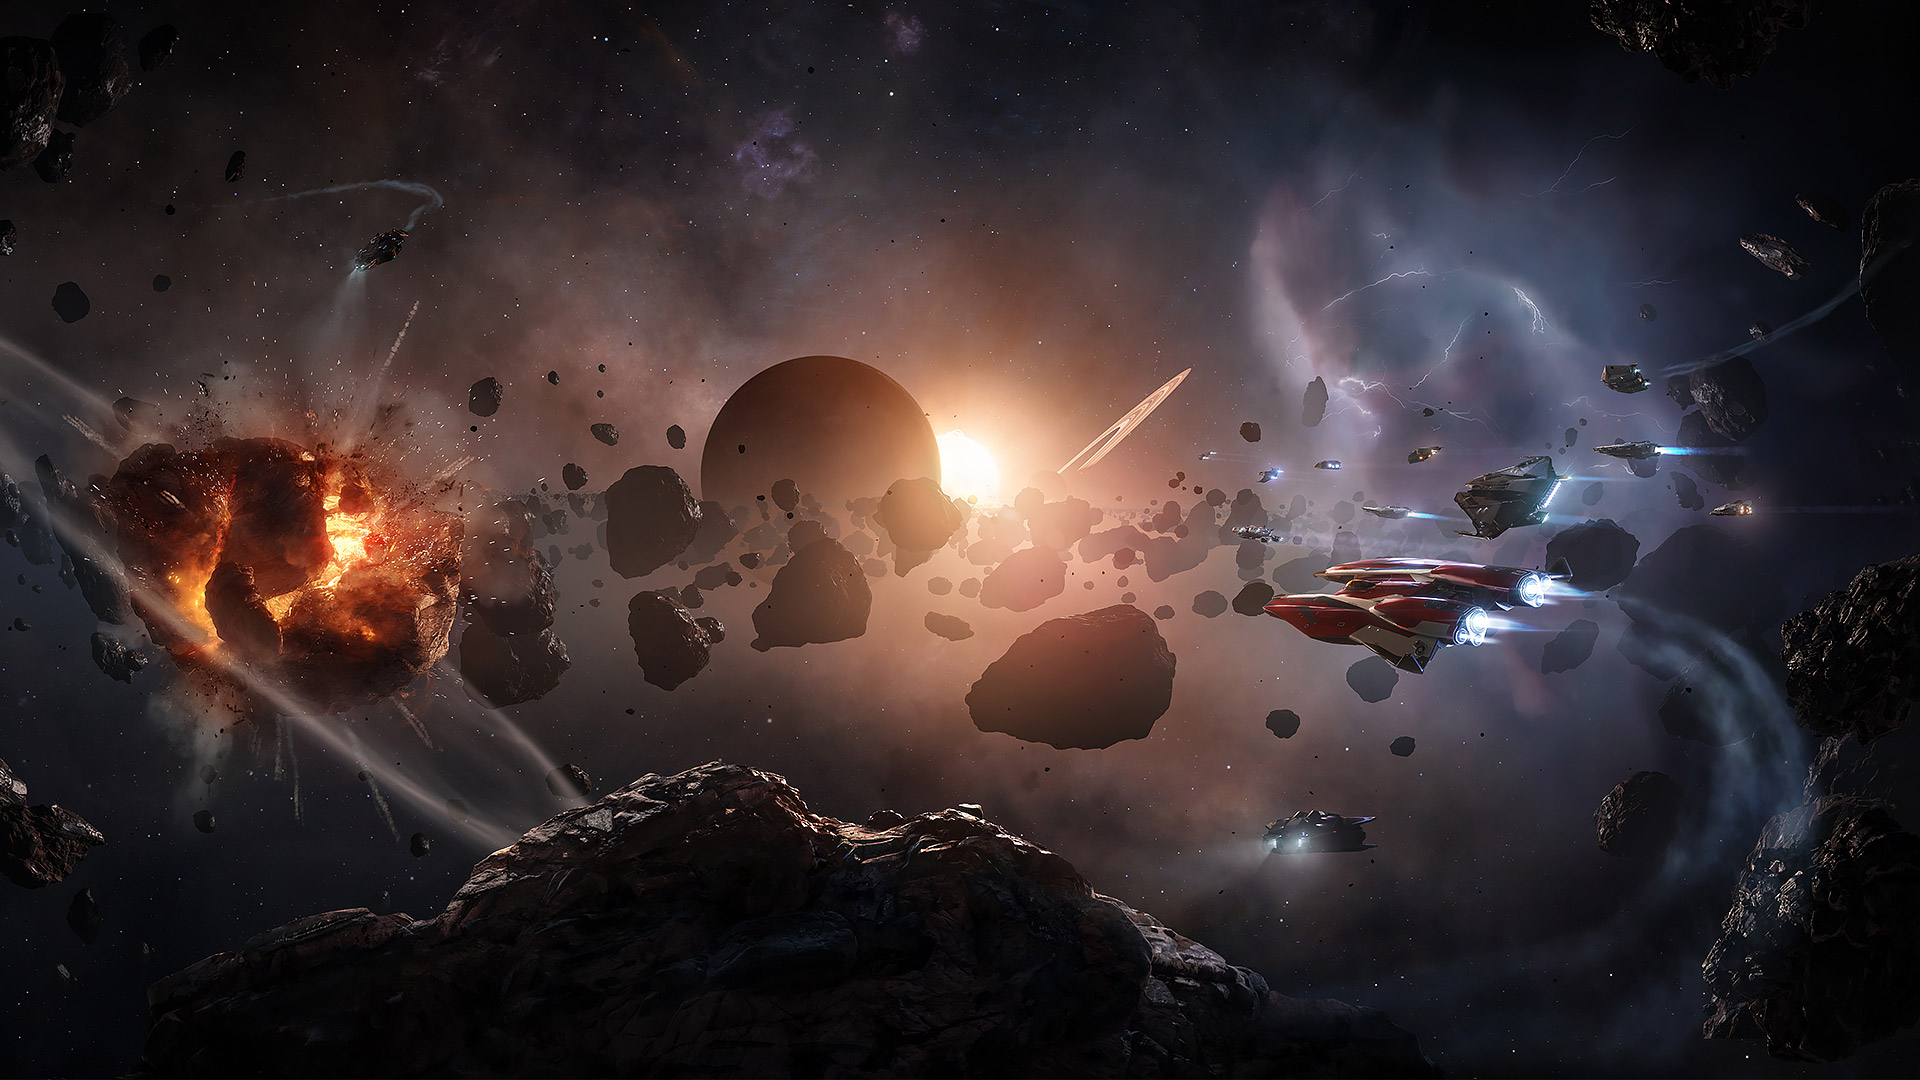 Chapter 2 of Elite Dangerous: Beyond now available for free